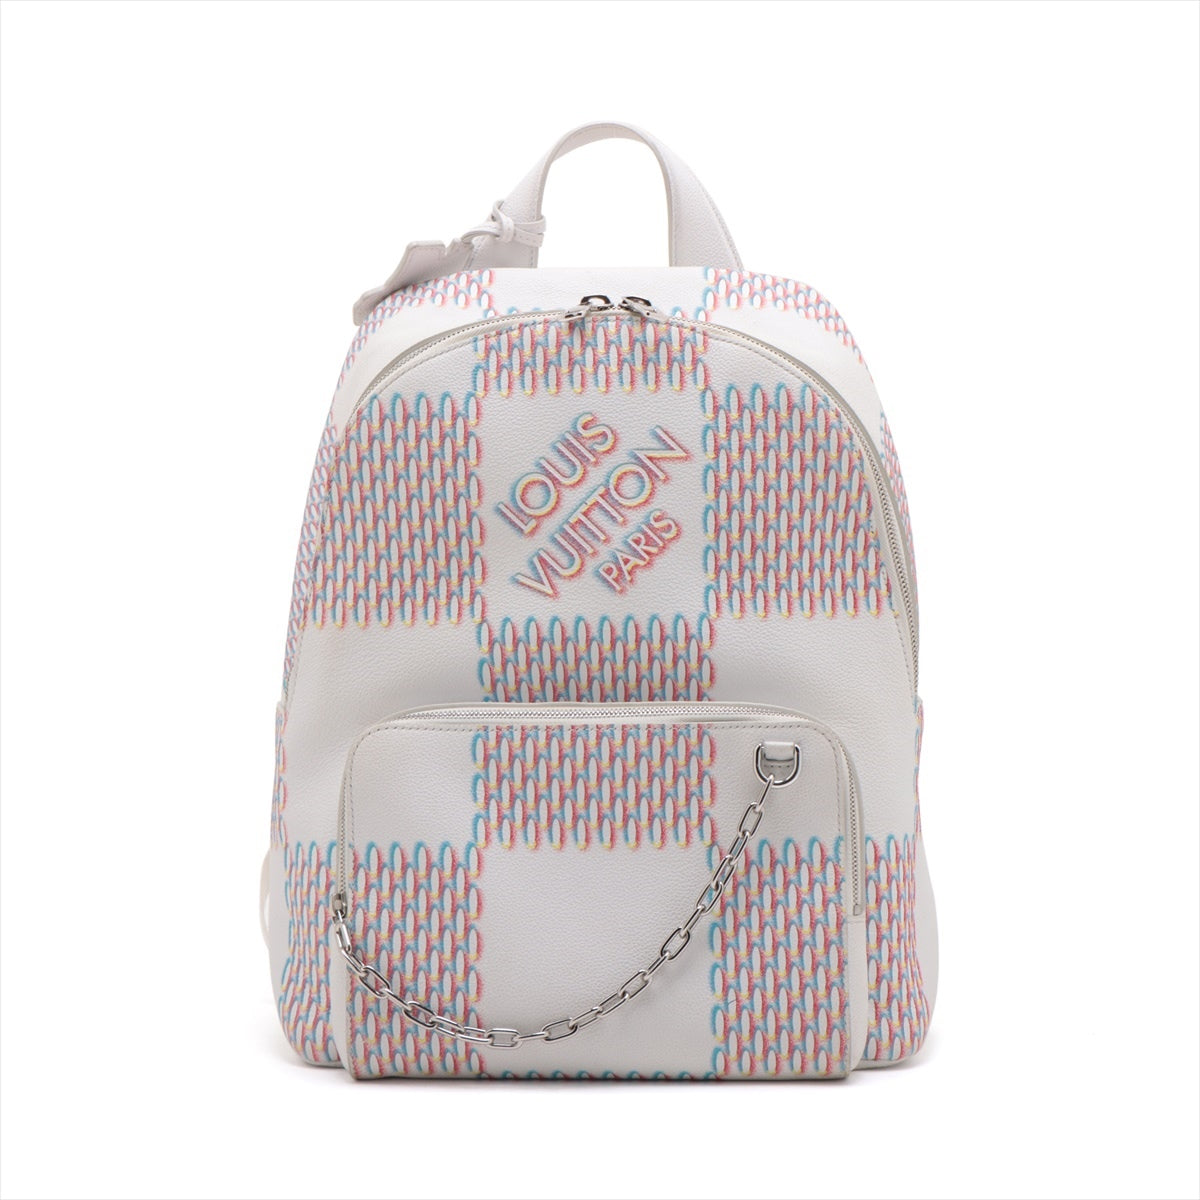 Louis Vuitton Damier sprays Backpack M20664 There was an RFID response